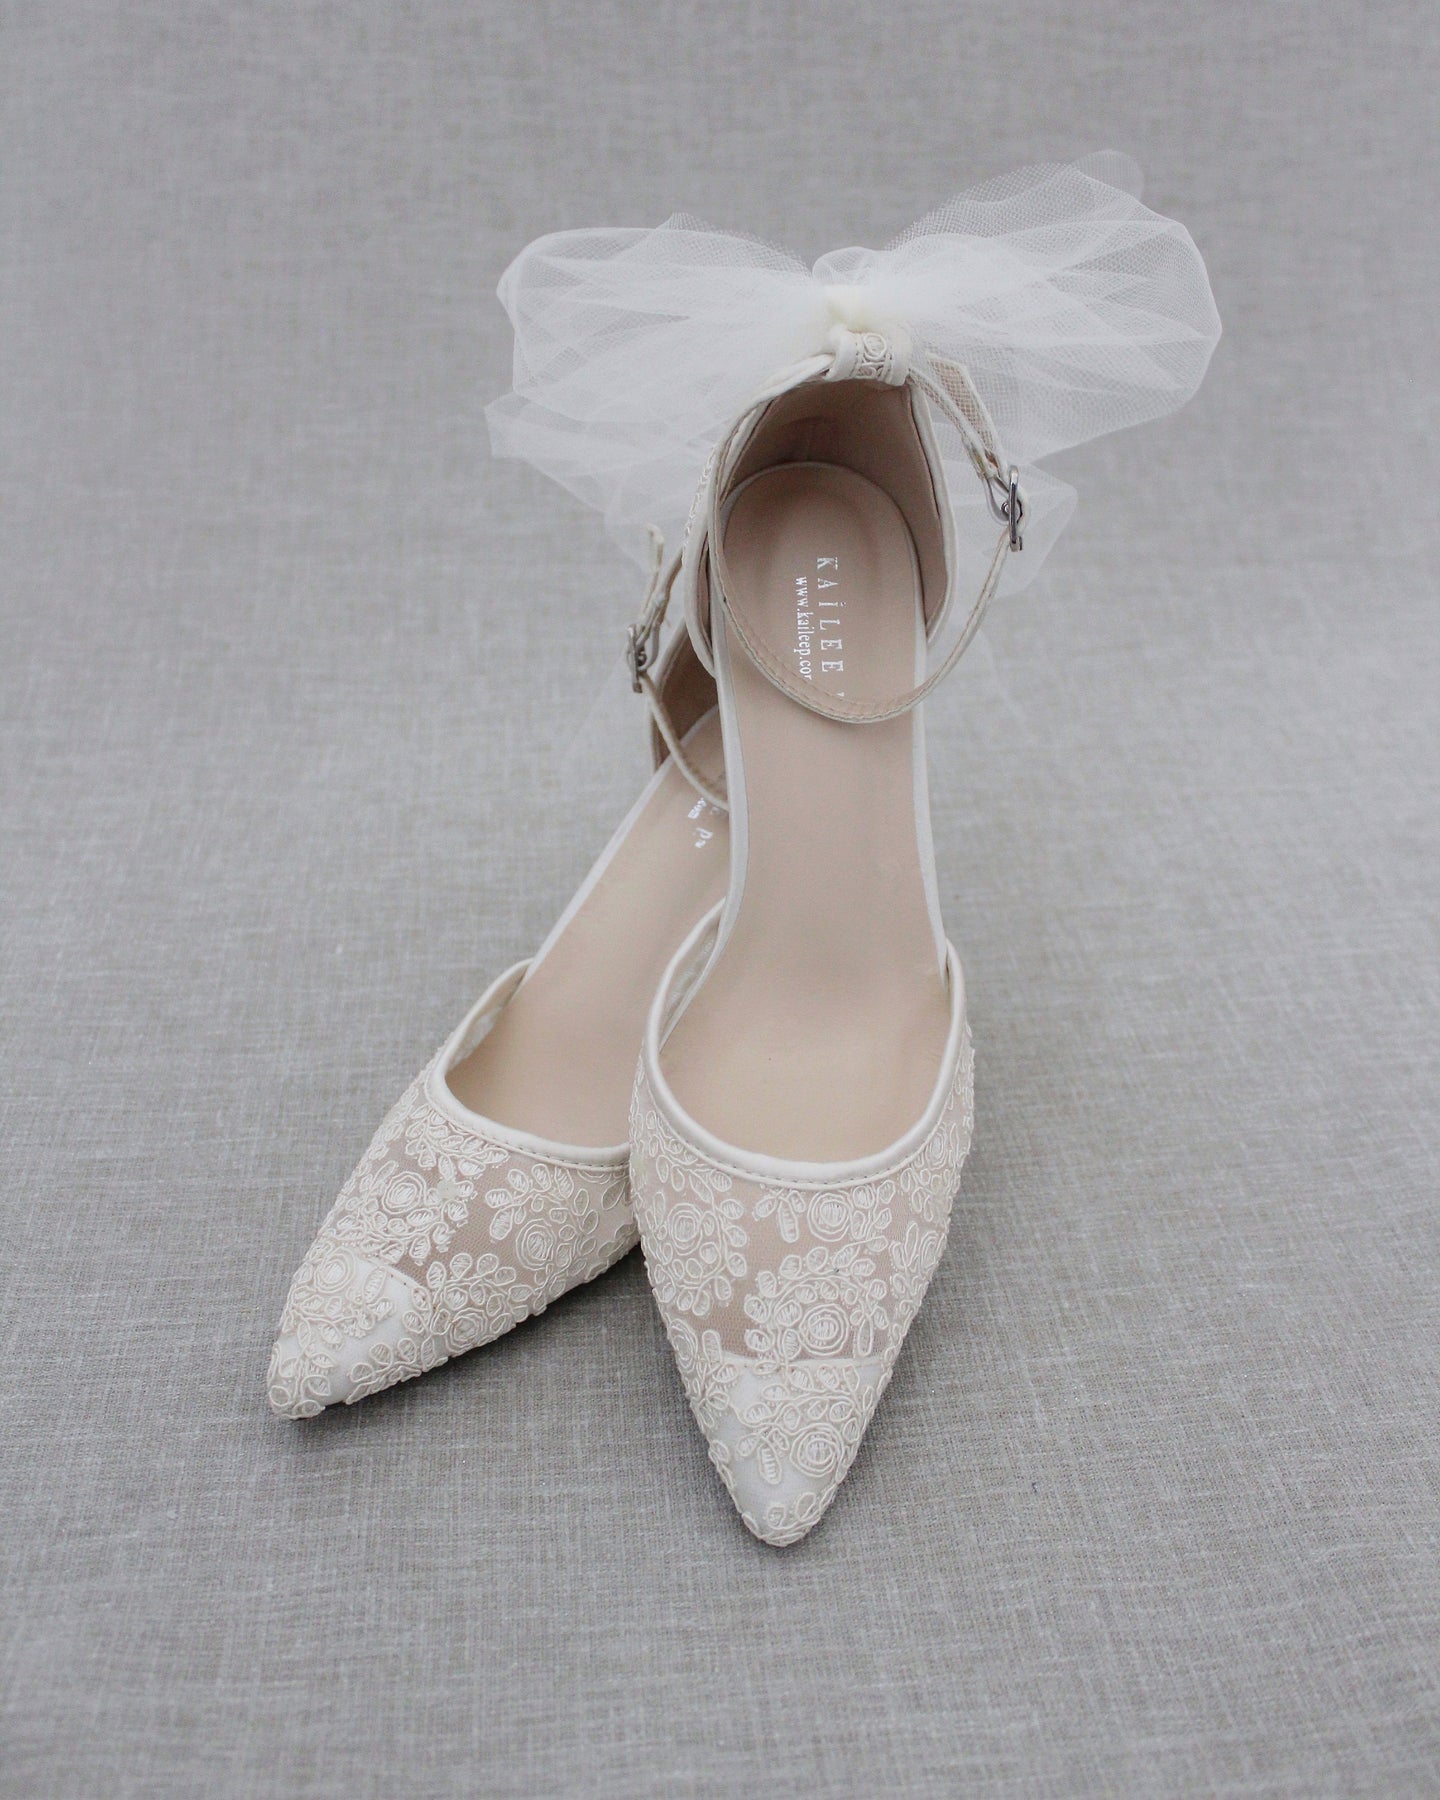 Something Blue Wedding Shoes, Bridesmaids Shoes, Formal Shoes – Page 3 ...